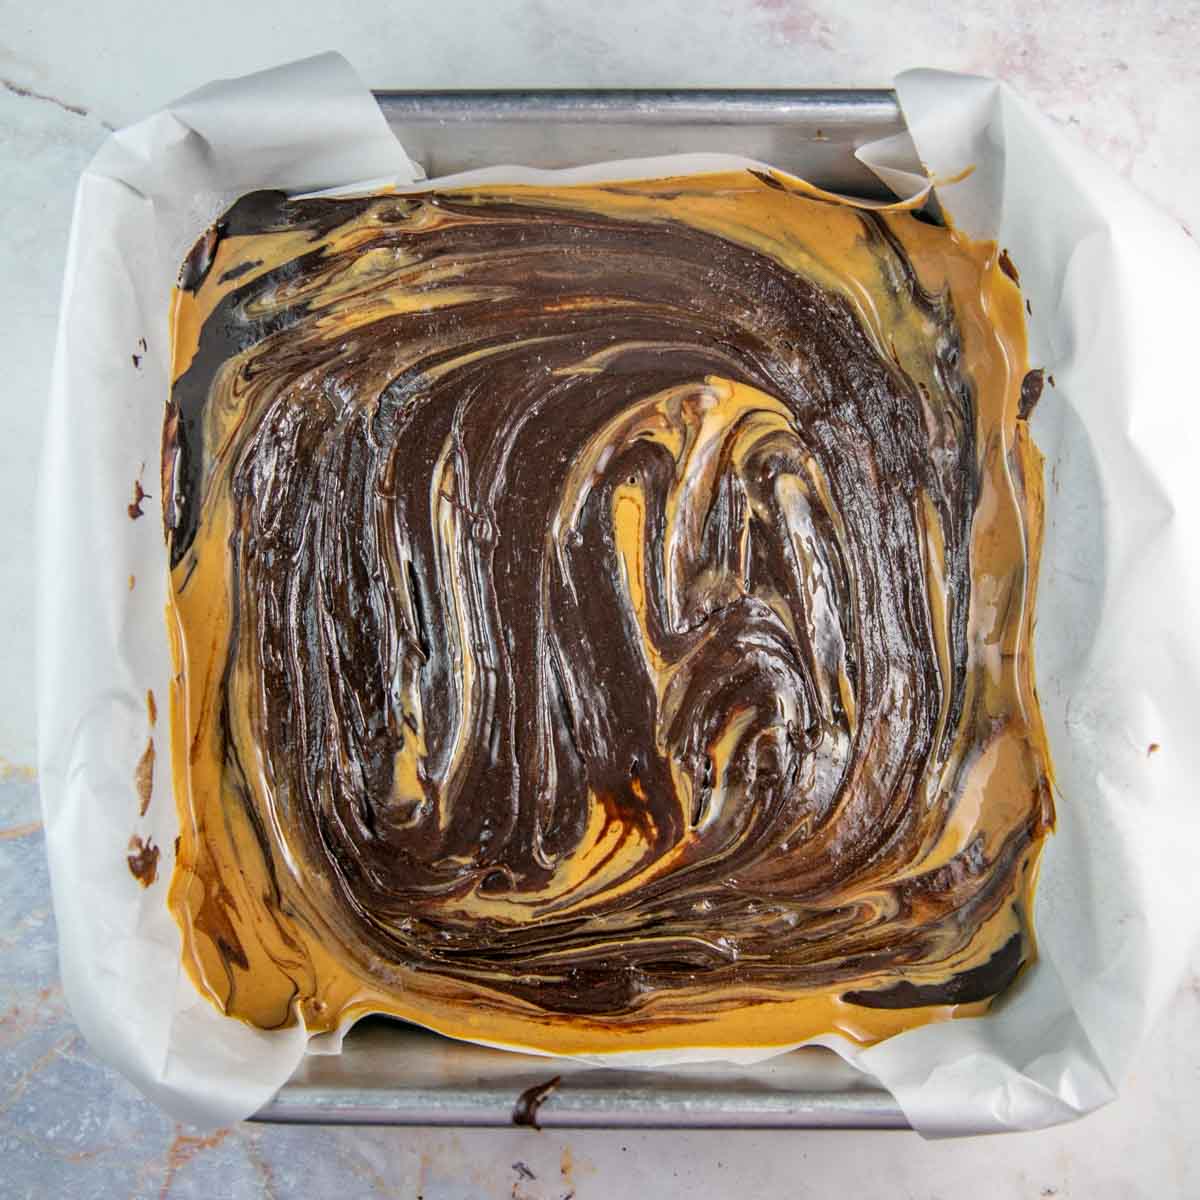 swirling chocolate batter on top of melted peanut butter